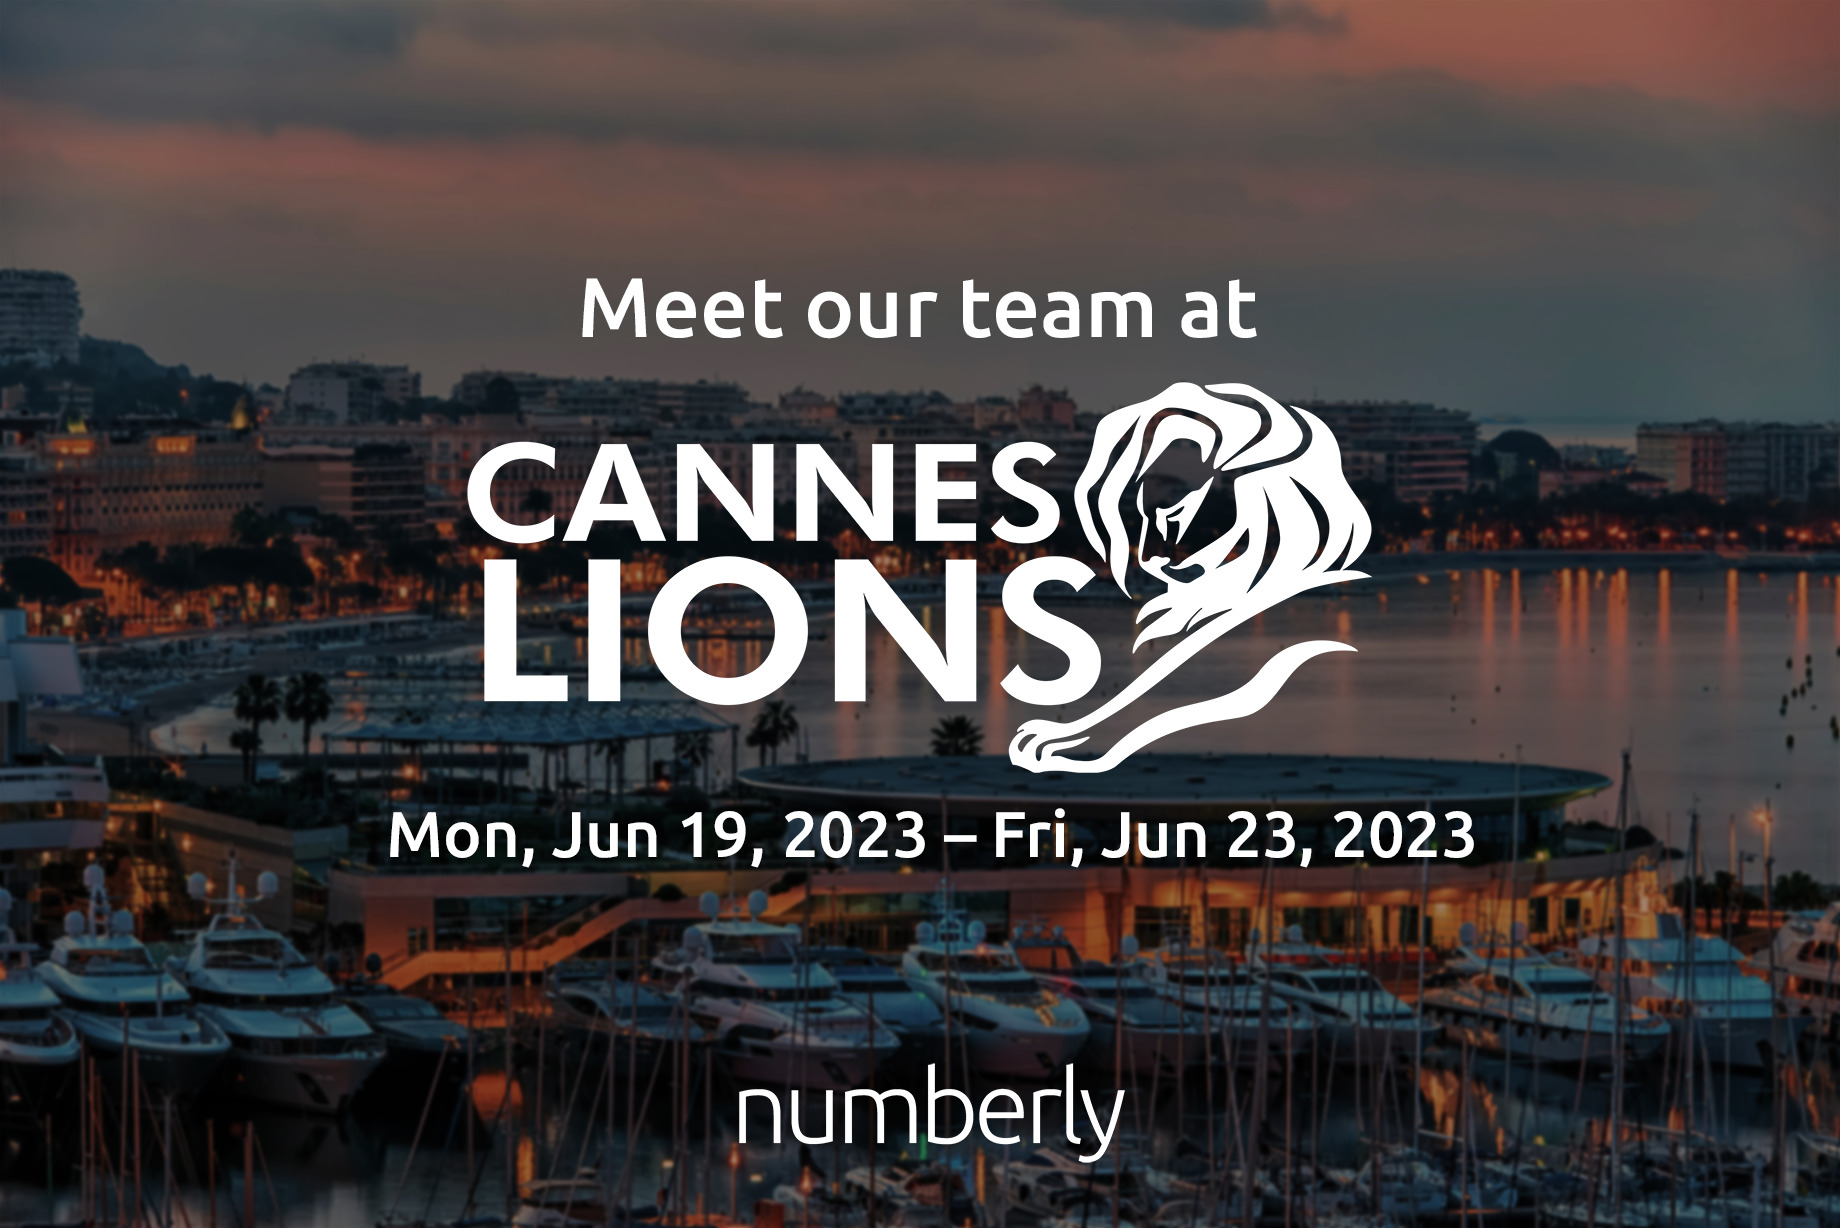 Meet us at the Cannes Lions Festival Numberly